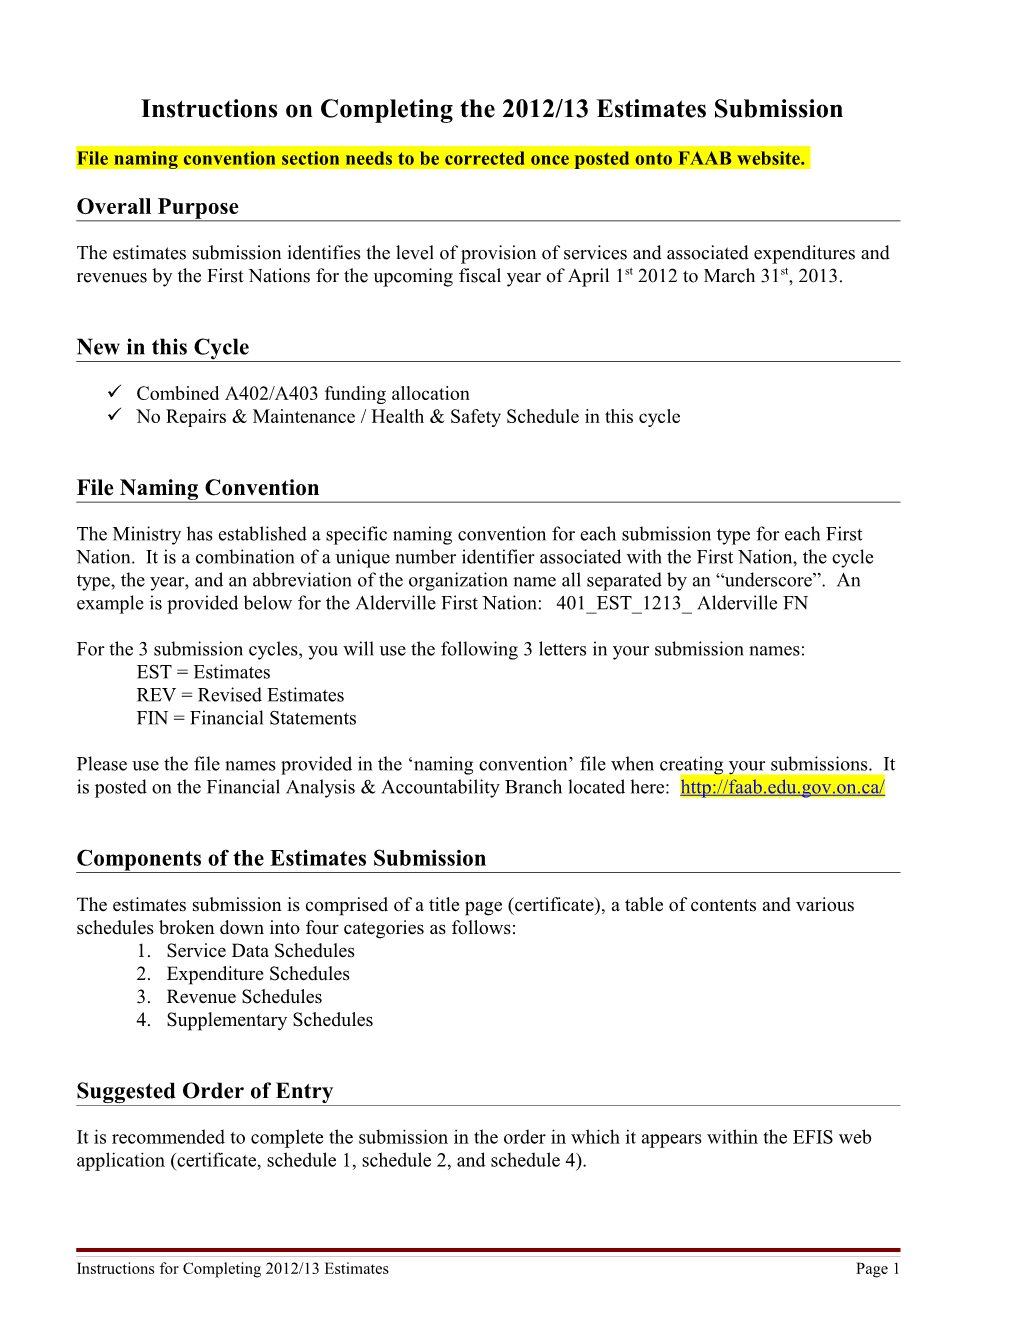 Instructions on Completing the 2011 Estimates Submission